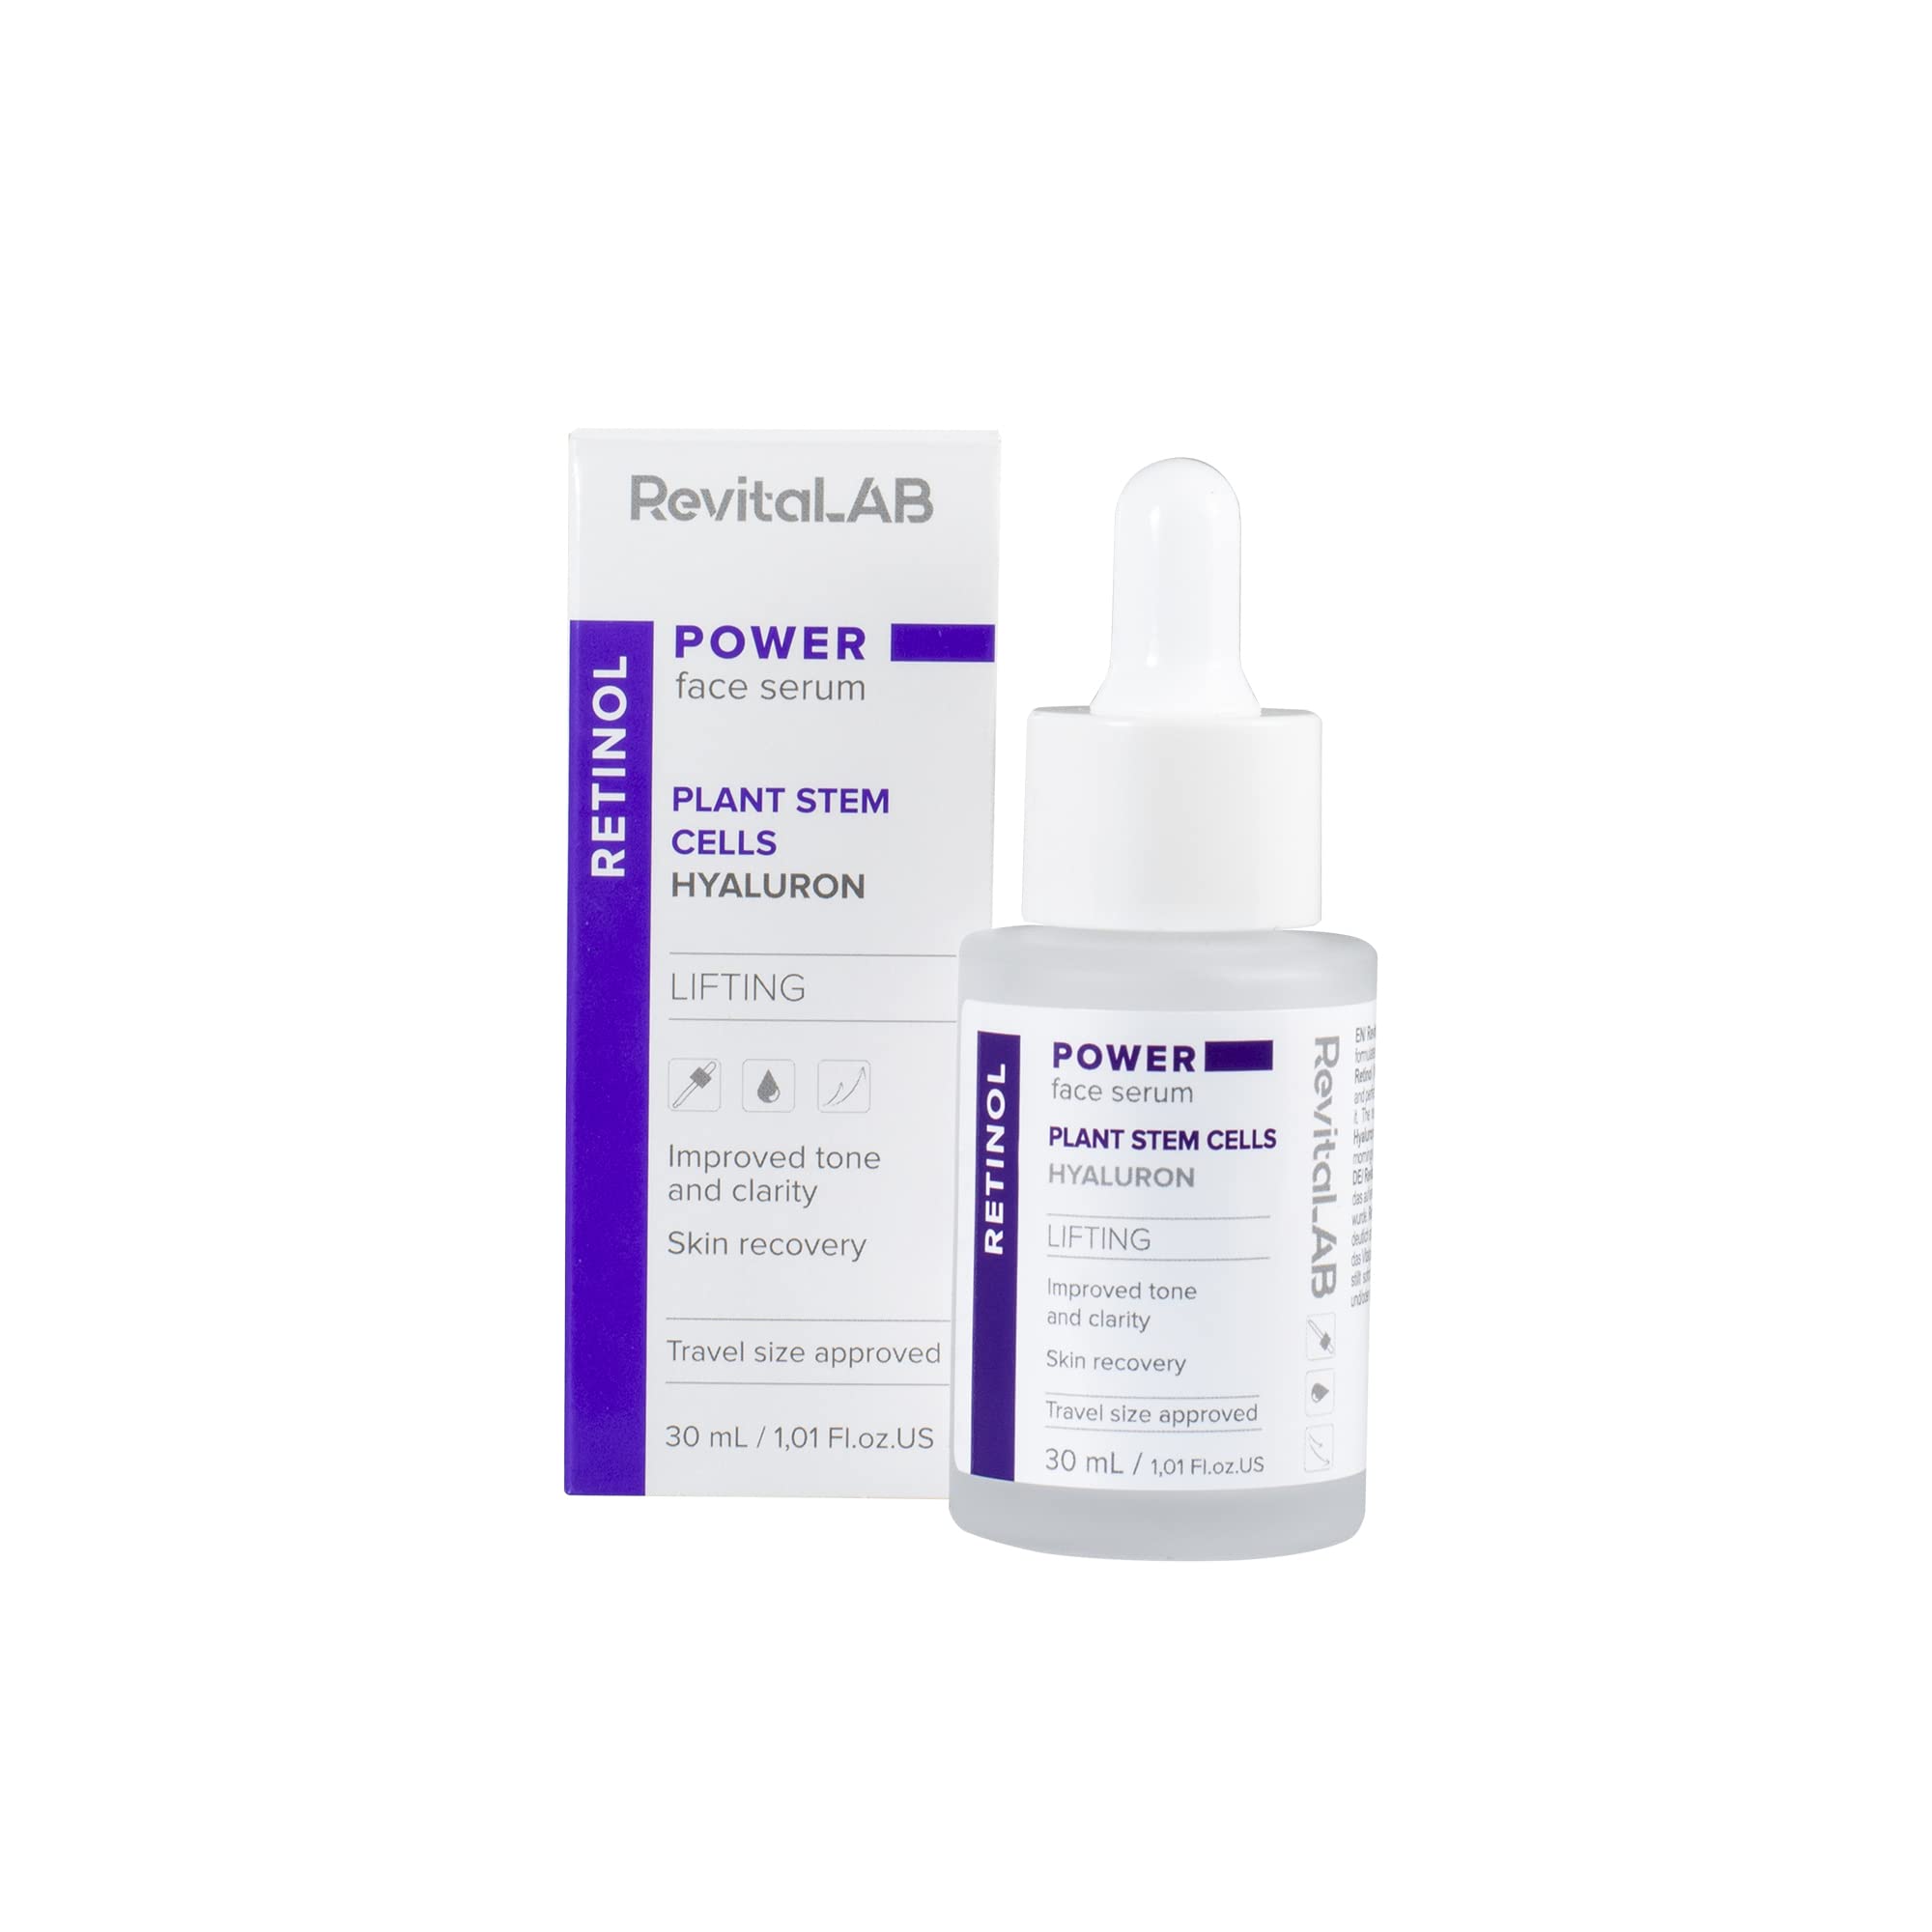 RevitaLAB Power Face Serum with Retinol and Plant Stem Cells